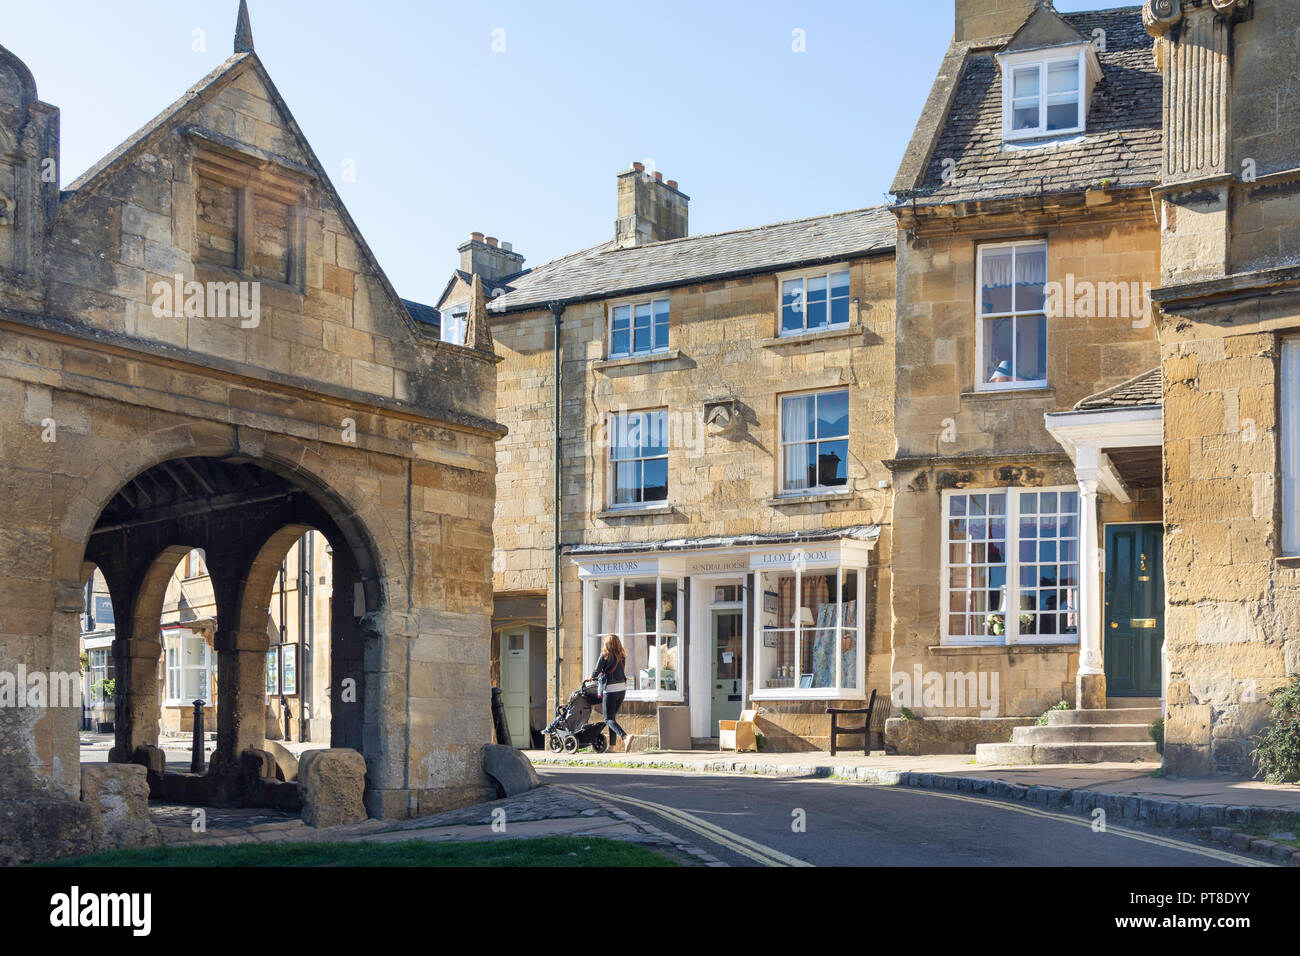 Market Hall, High Street, Chipping Campden, Gloucestershire, England, United Kingdom Stock Photo